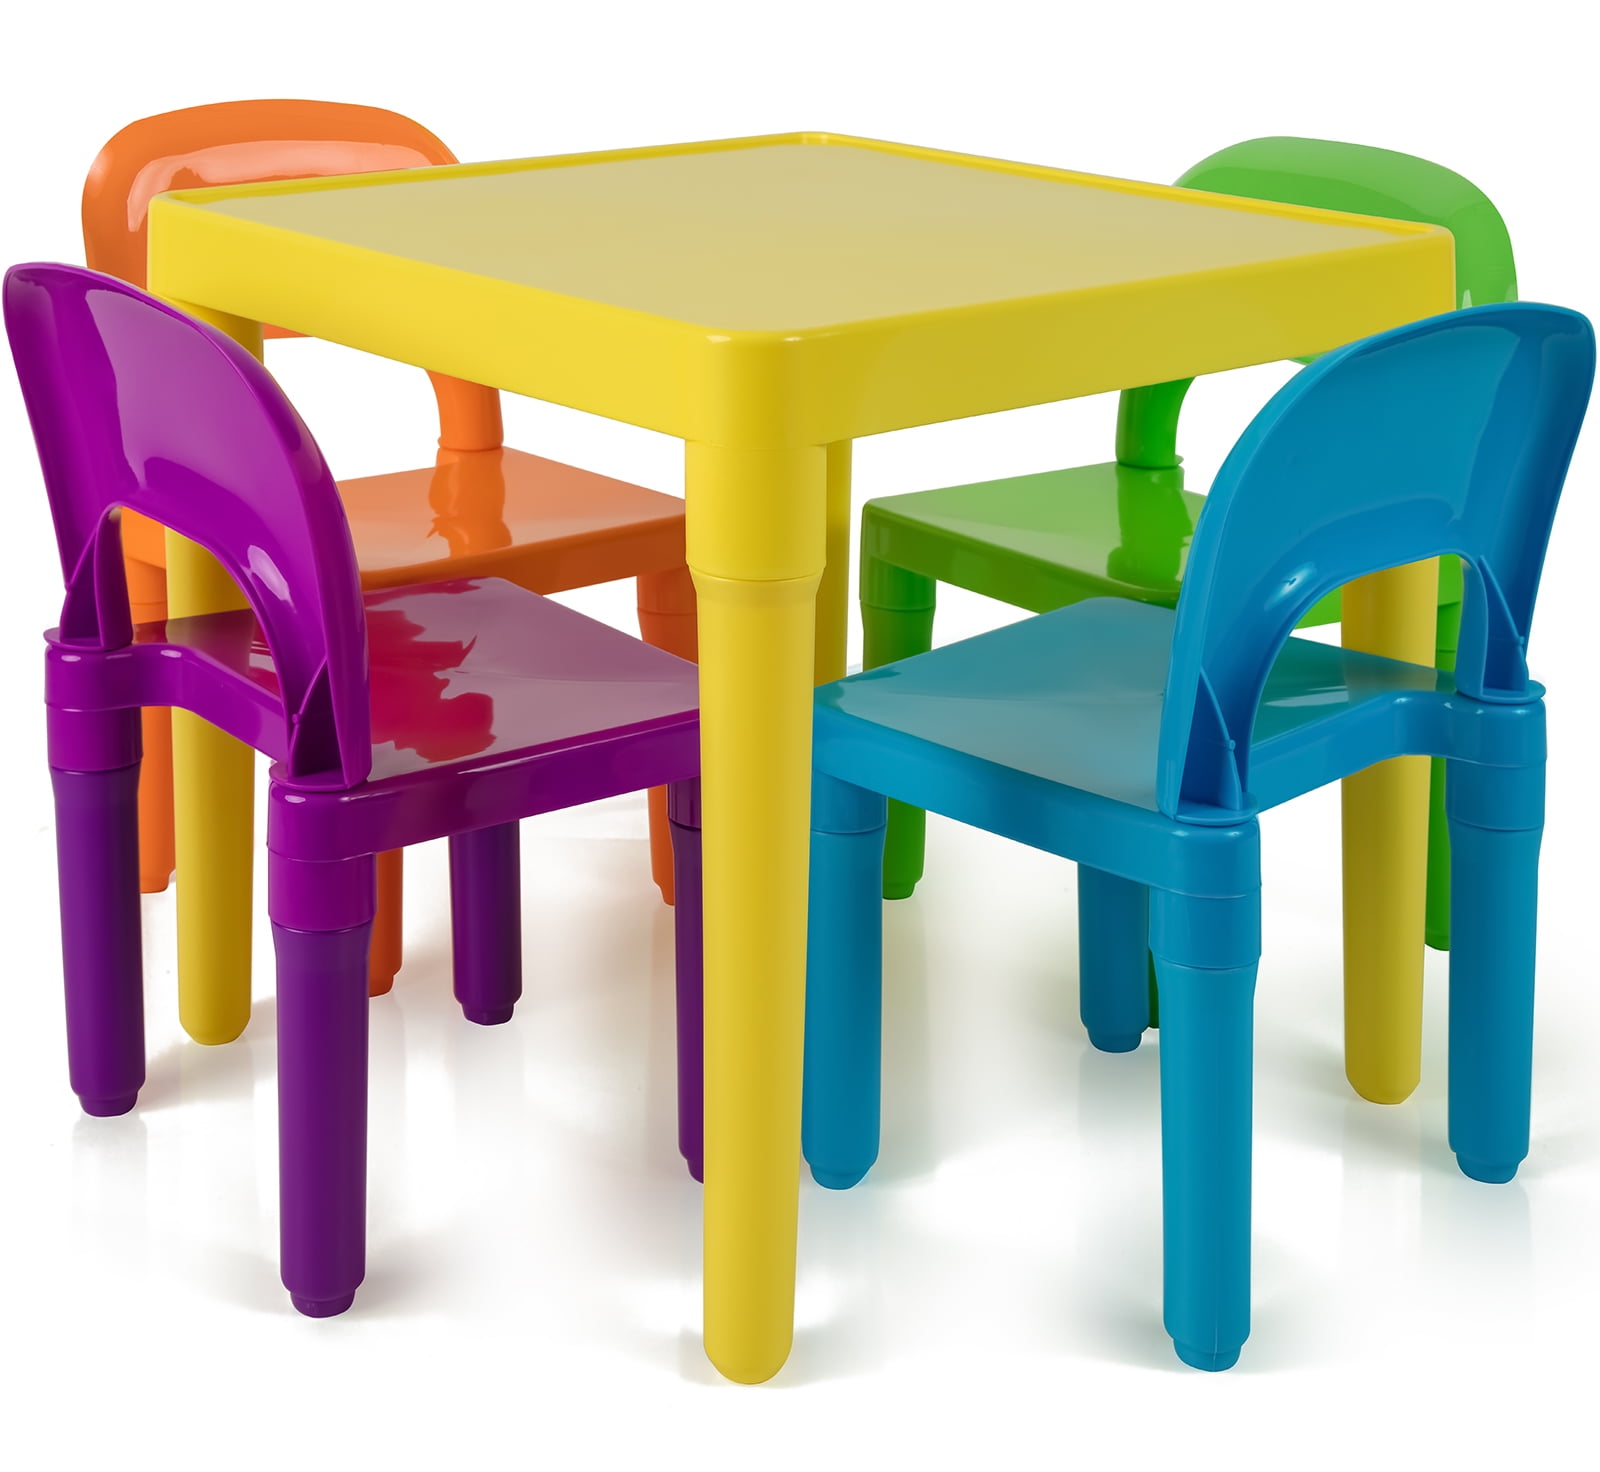 Small Round Table Set Lego Top Plastic Kids Colorful Chair Playroom Furniture 